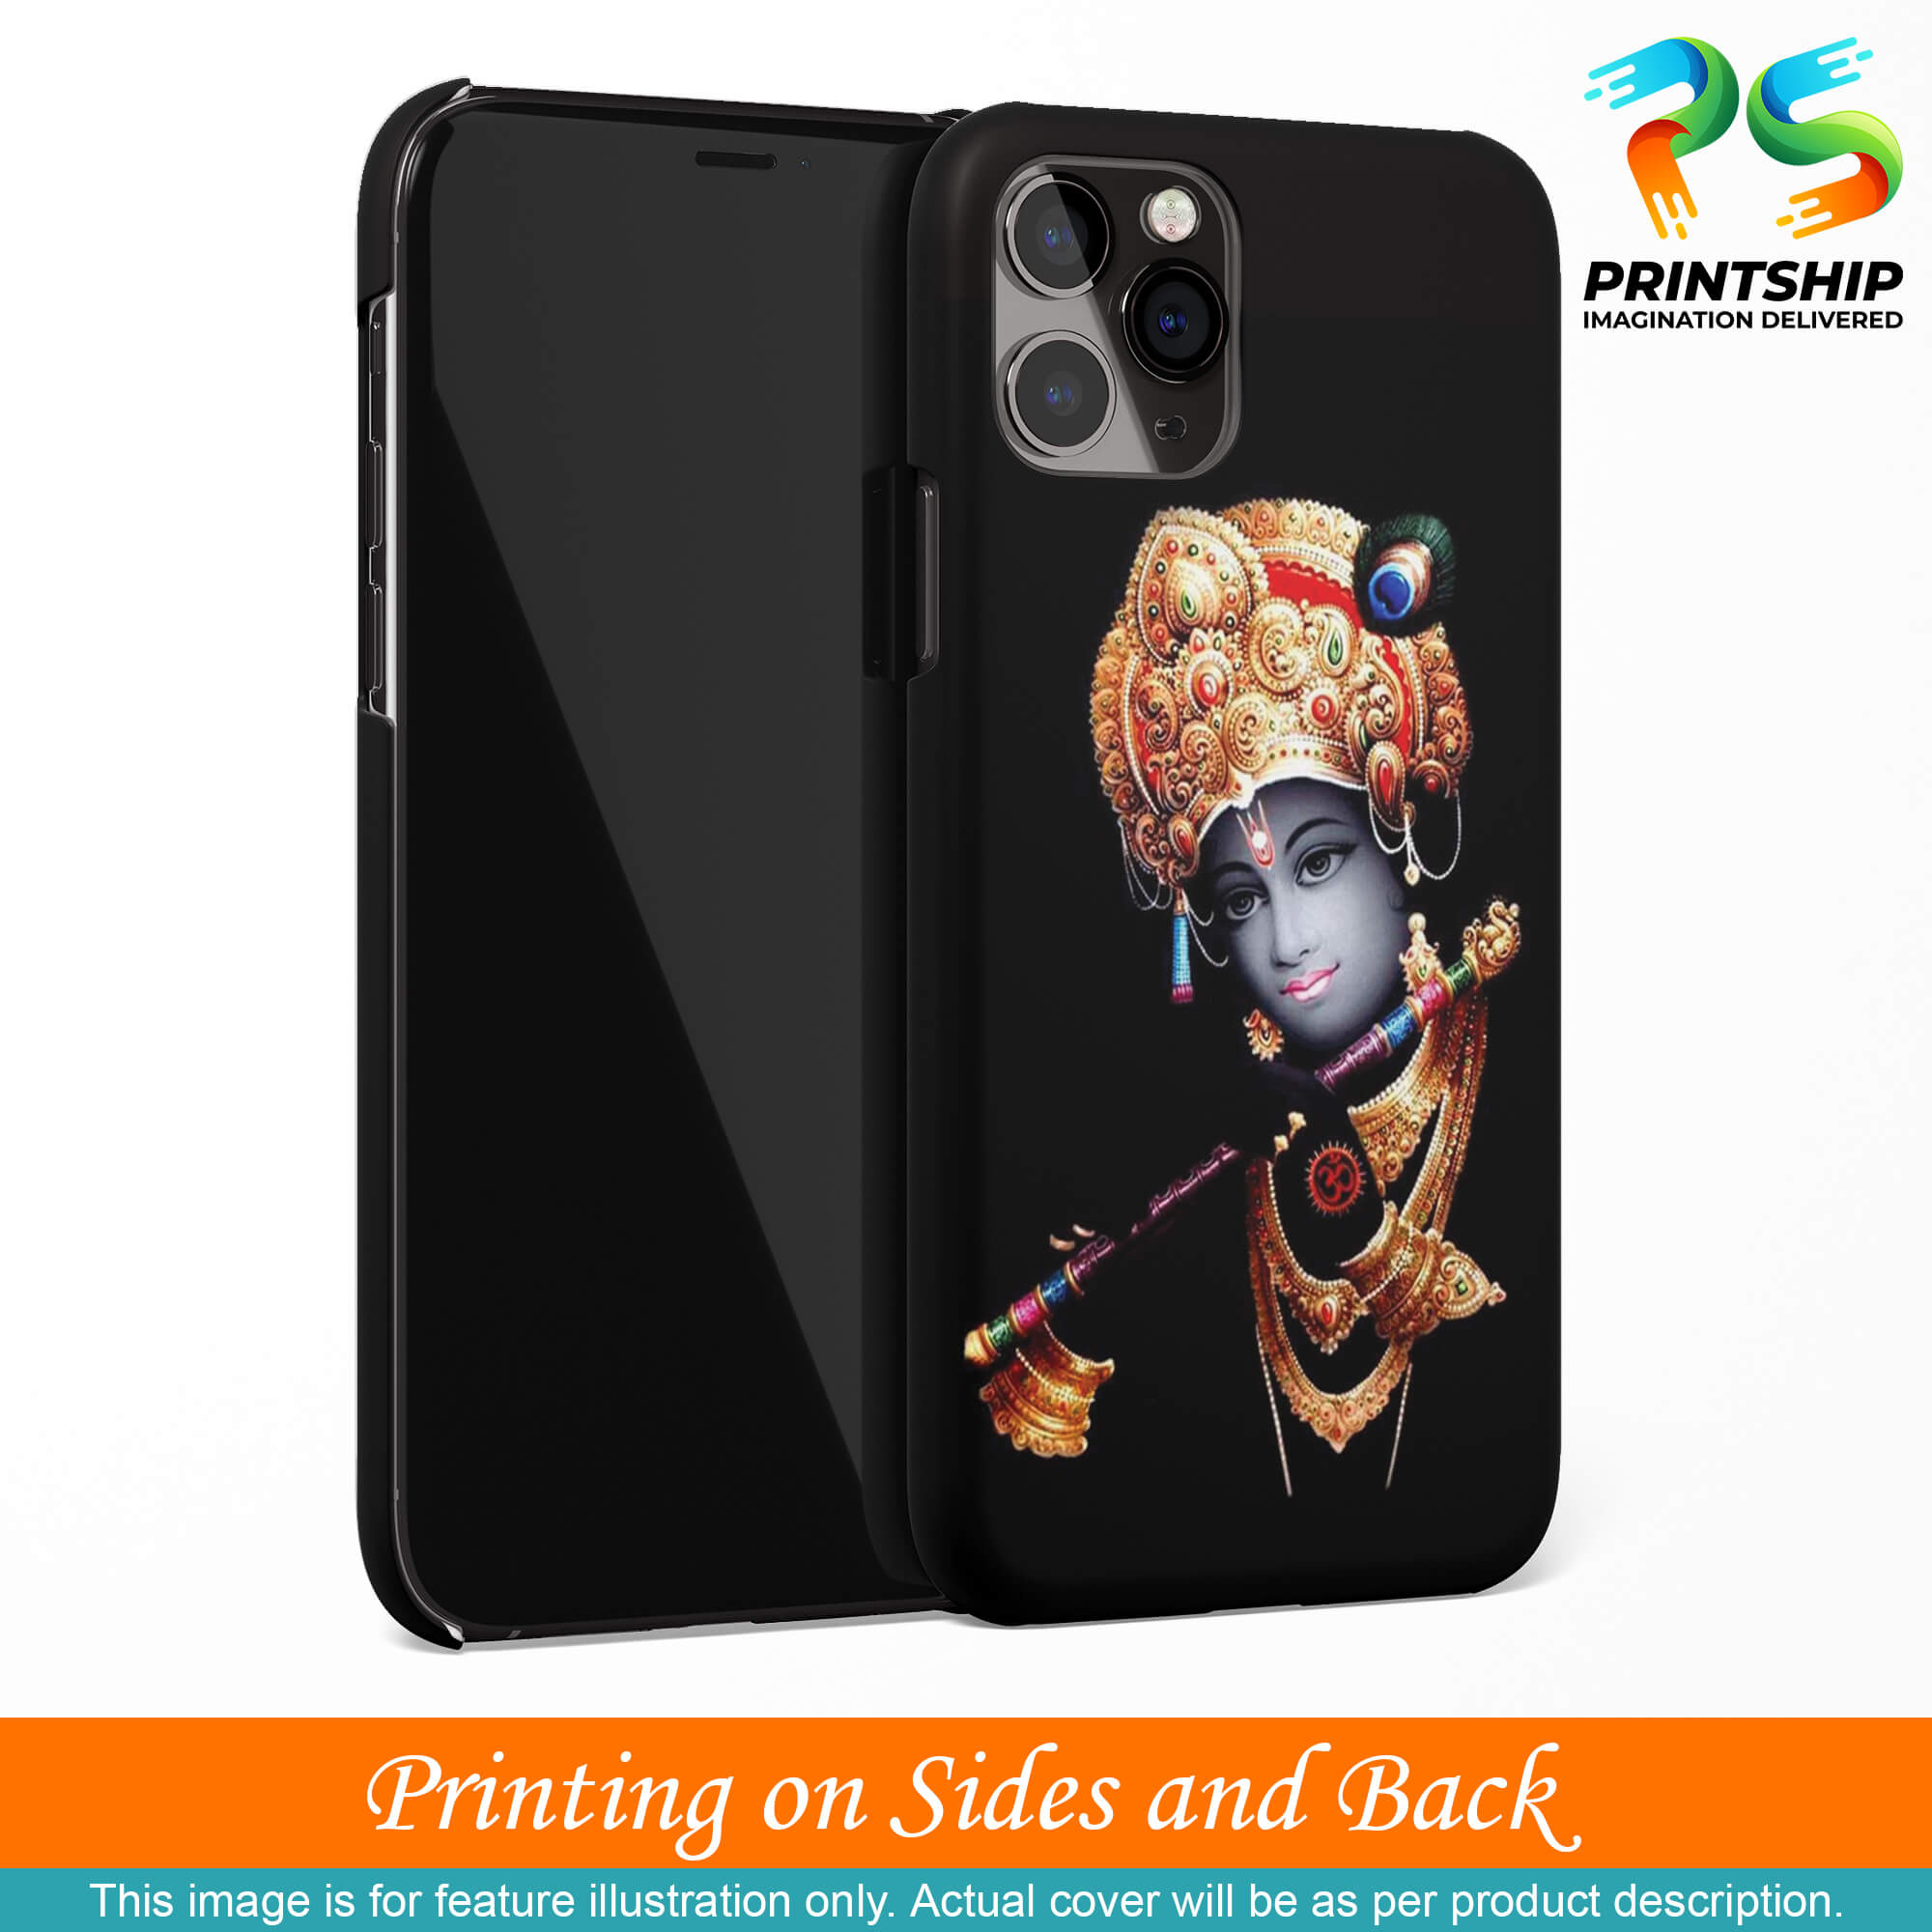 D1540-Beautiful Looking Lord Krishna Back Cover for Apple iPhone 7-Image3